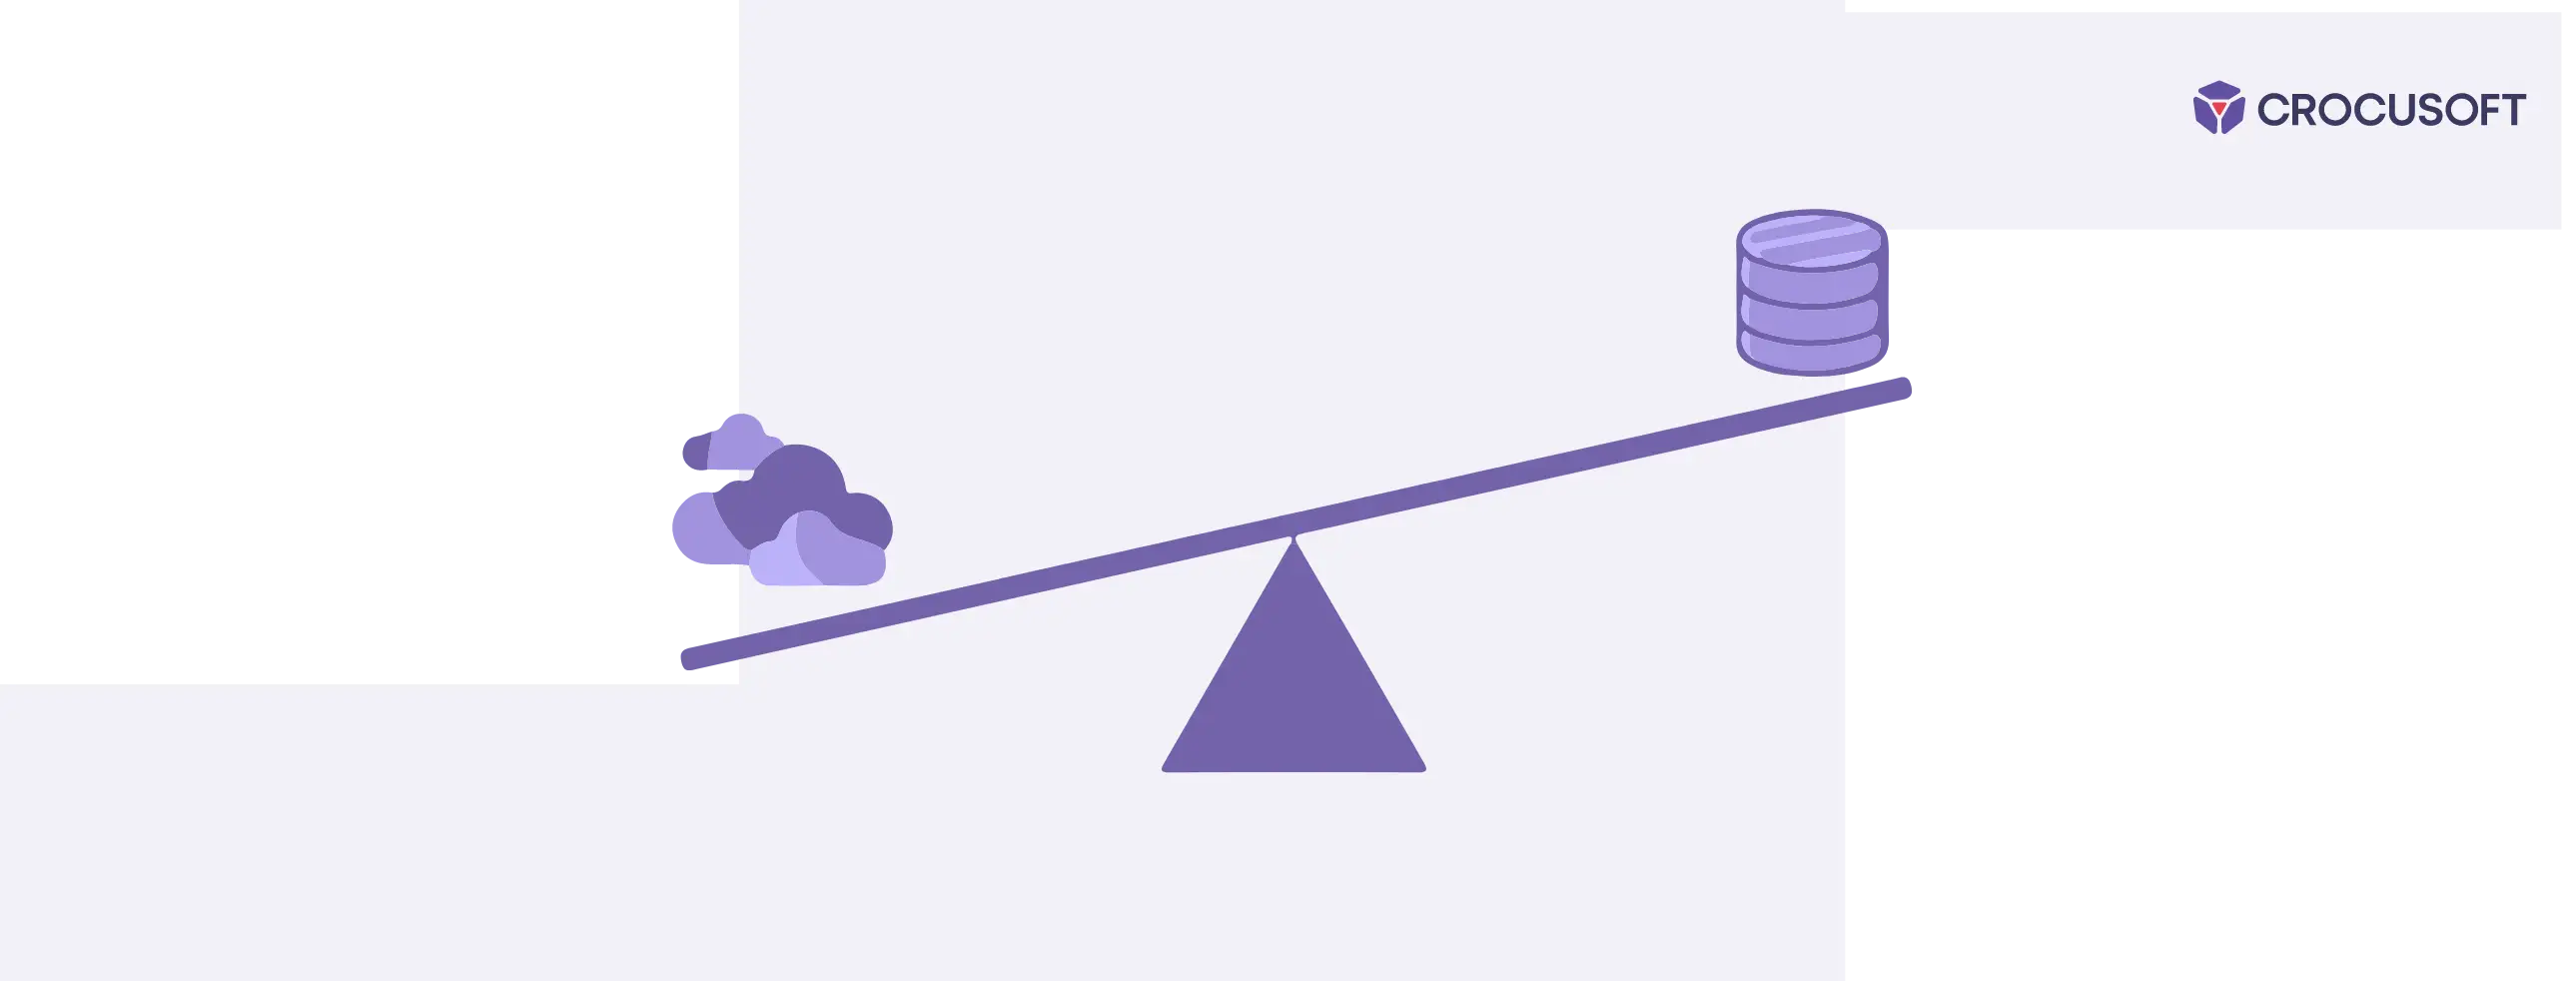 a scale to show the balance between SaaS and SaaP